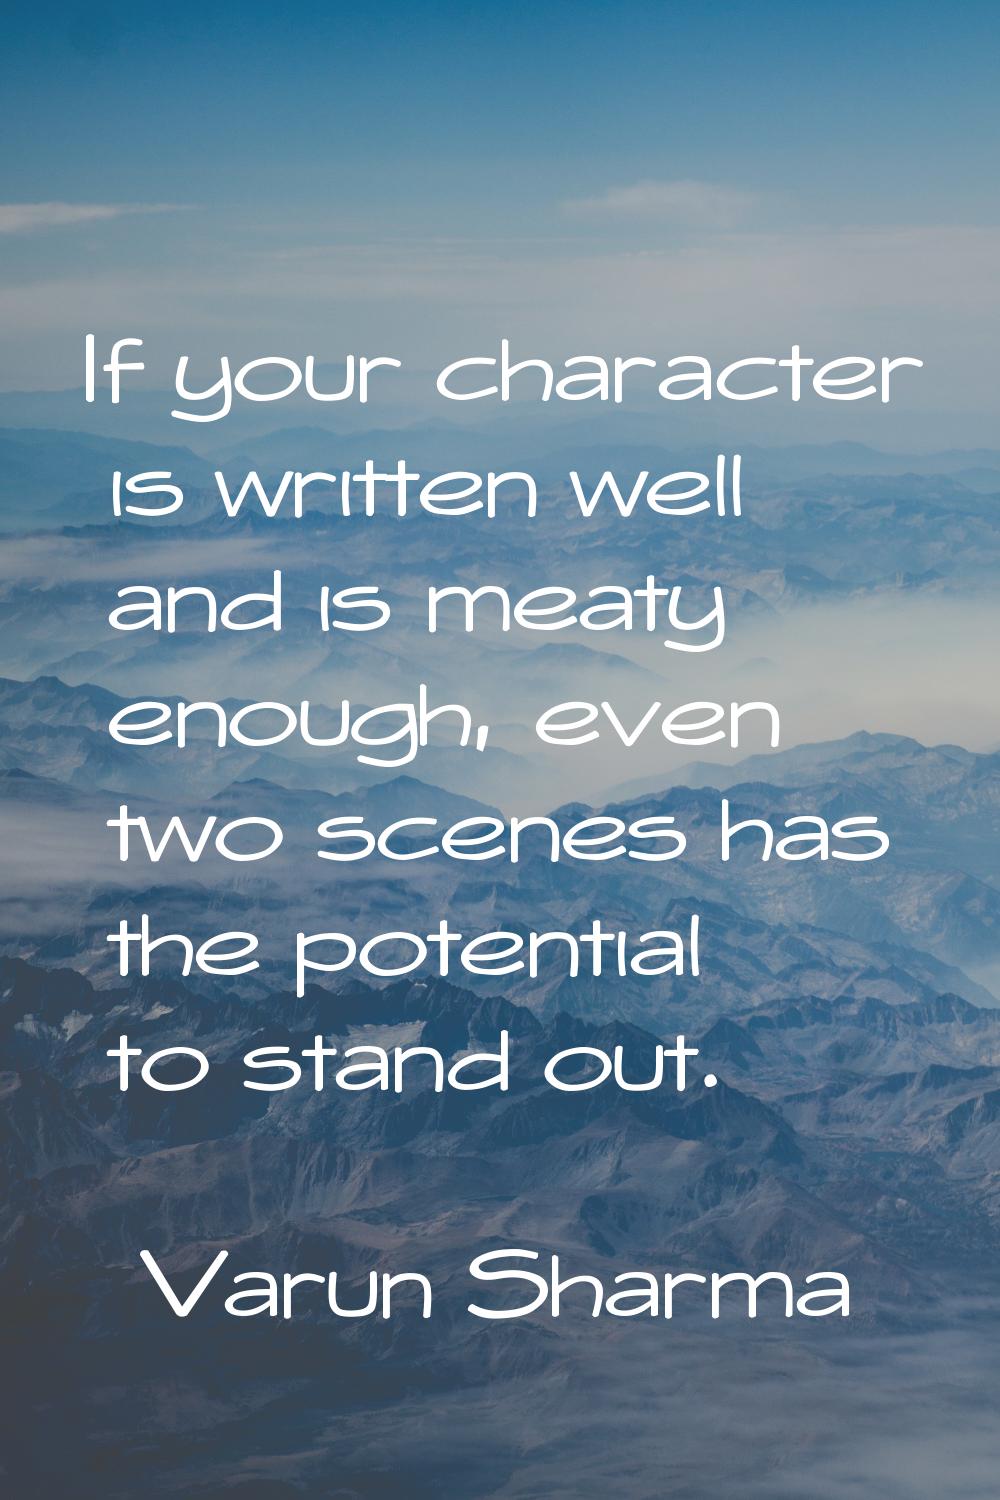 If your character is written well and is meaty enough, even two scenes has the potential to stand o